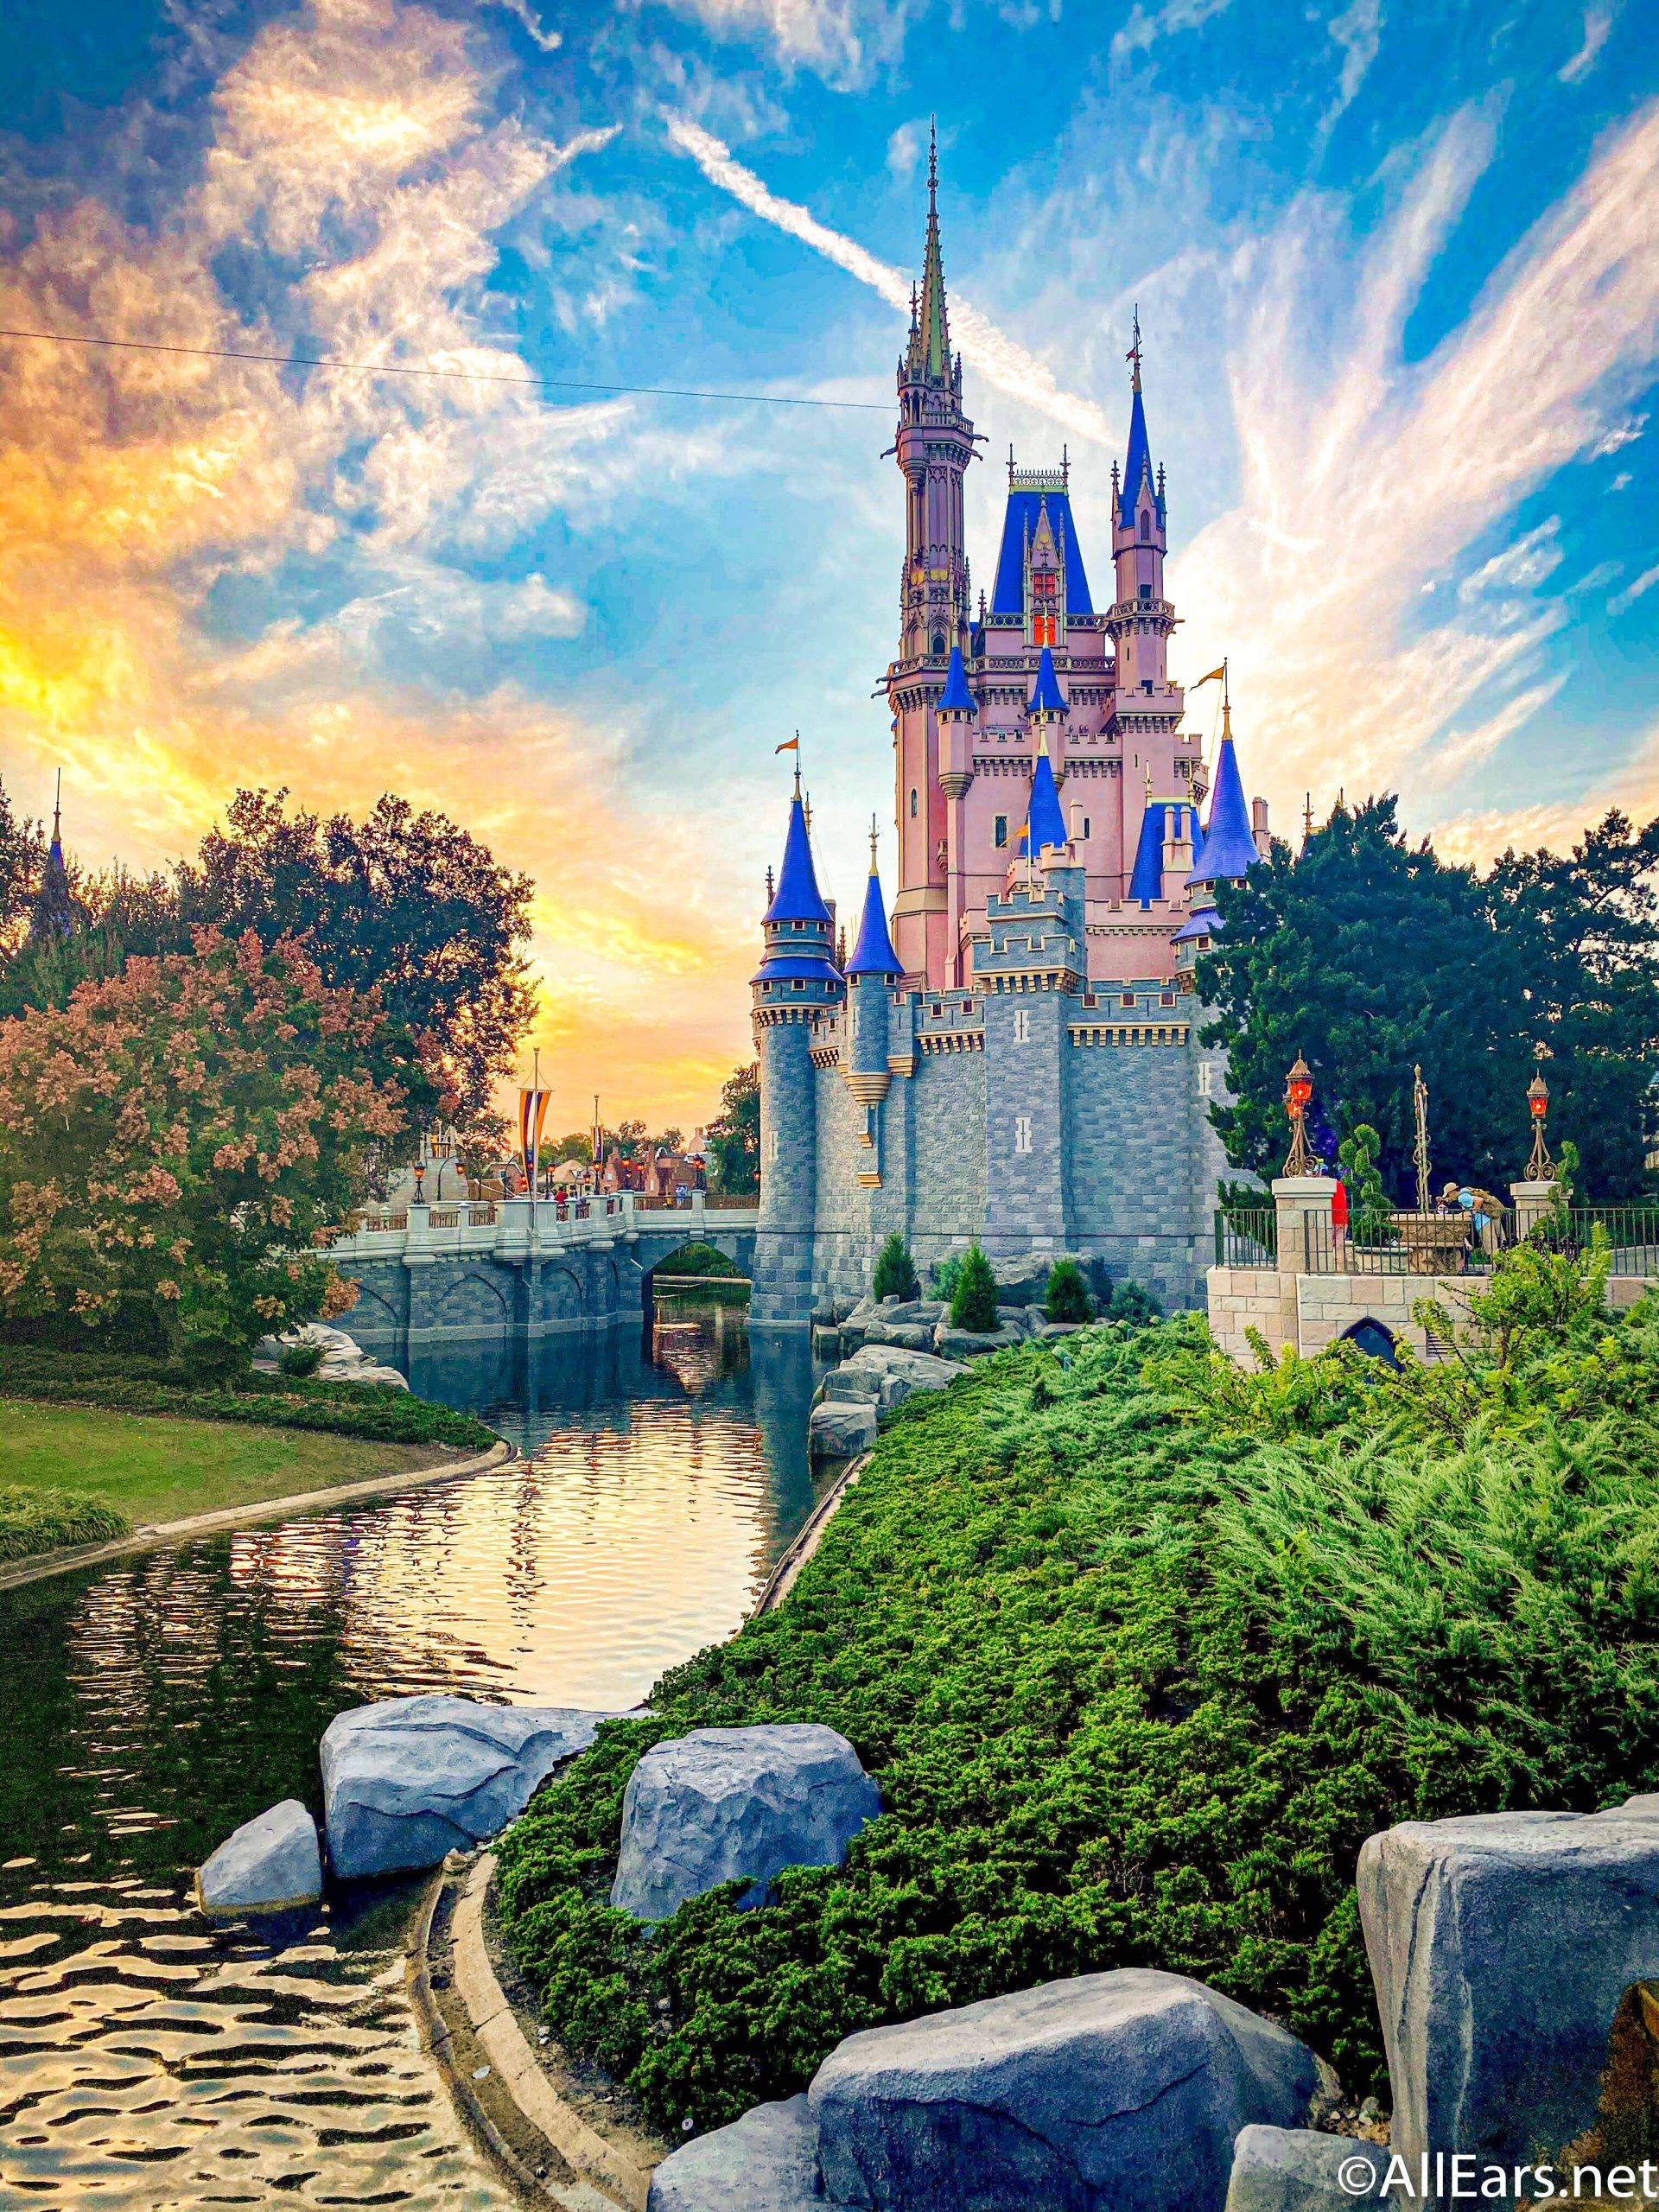 Stunning Disney World Wallpaper to Bring a Little Magic to Your Phone or Desktop